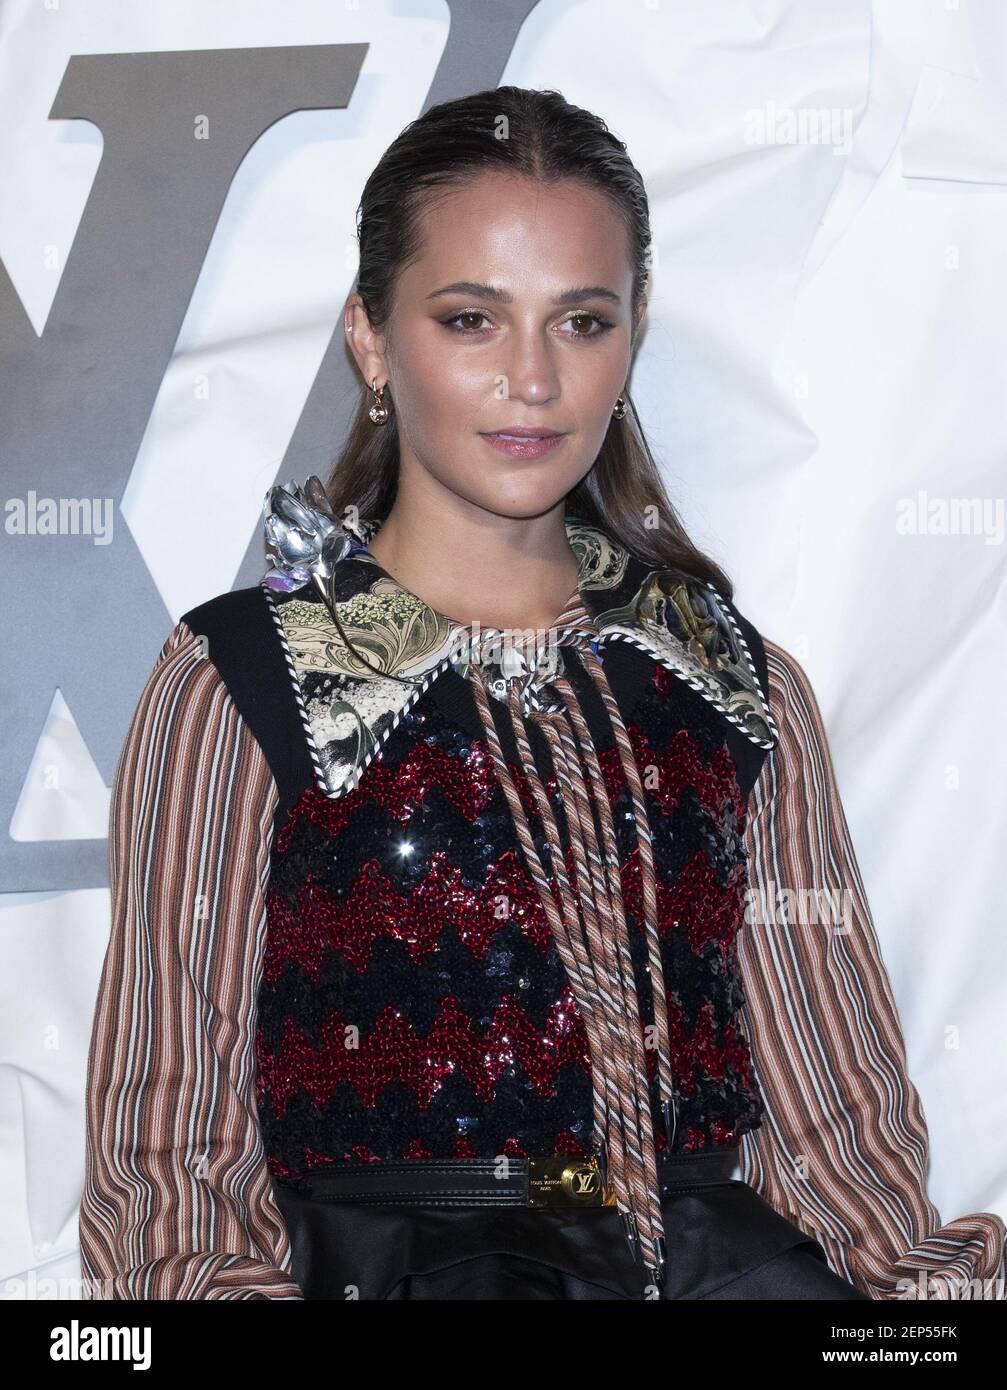 Swedish actress Alicia Vikander, attends a photo call for the Louis Vuitton  launching at Louis Vuitton Seoul in Seoul, South Korea on October 30, 2019.  (Photo by: Lee Young-ho/Sipa USA Stock Photo 